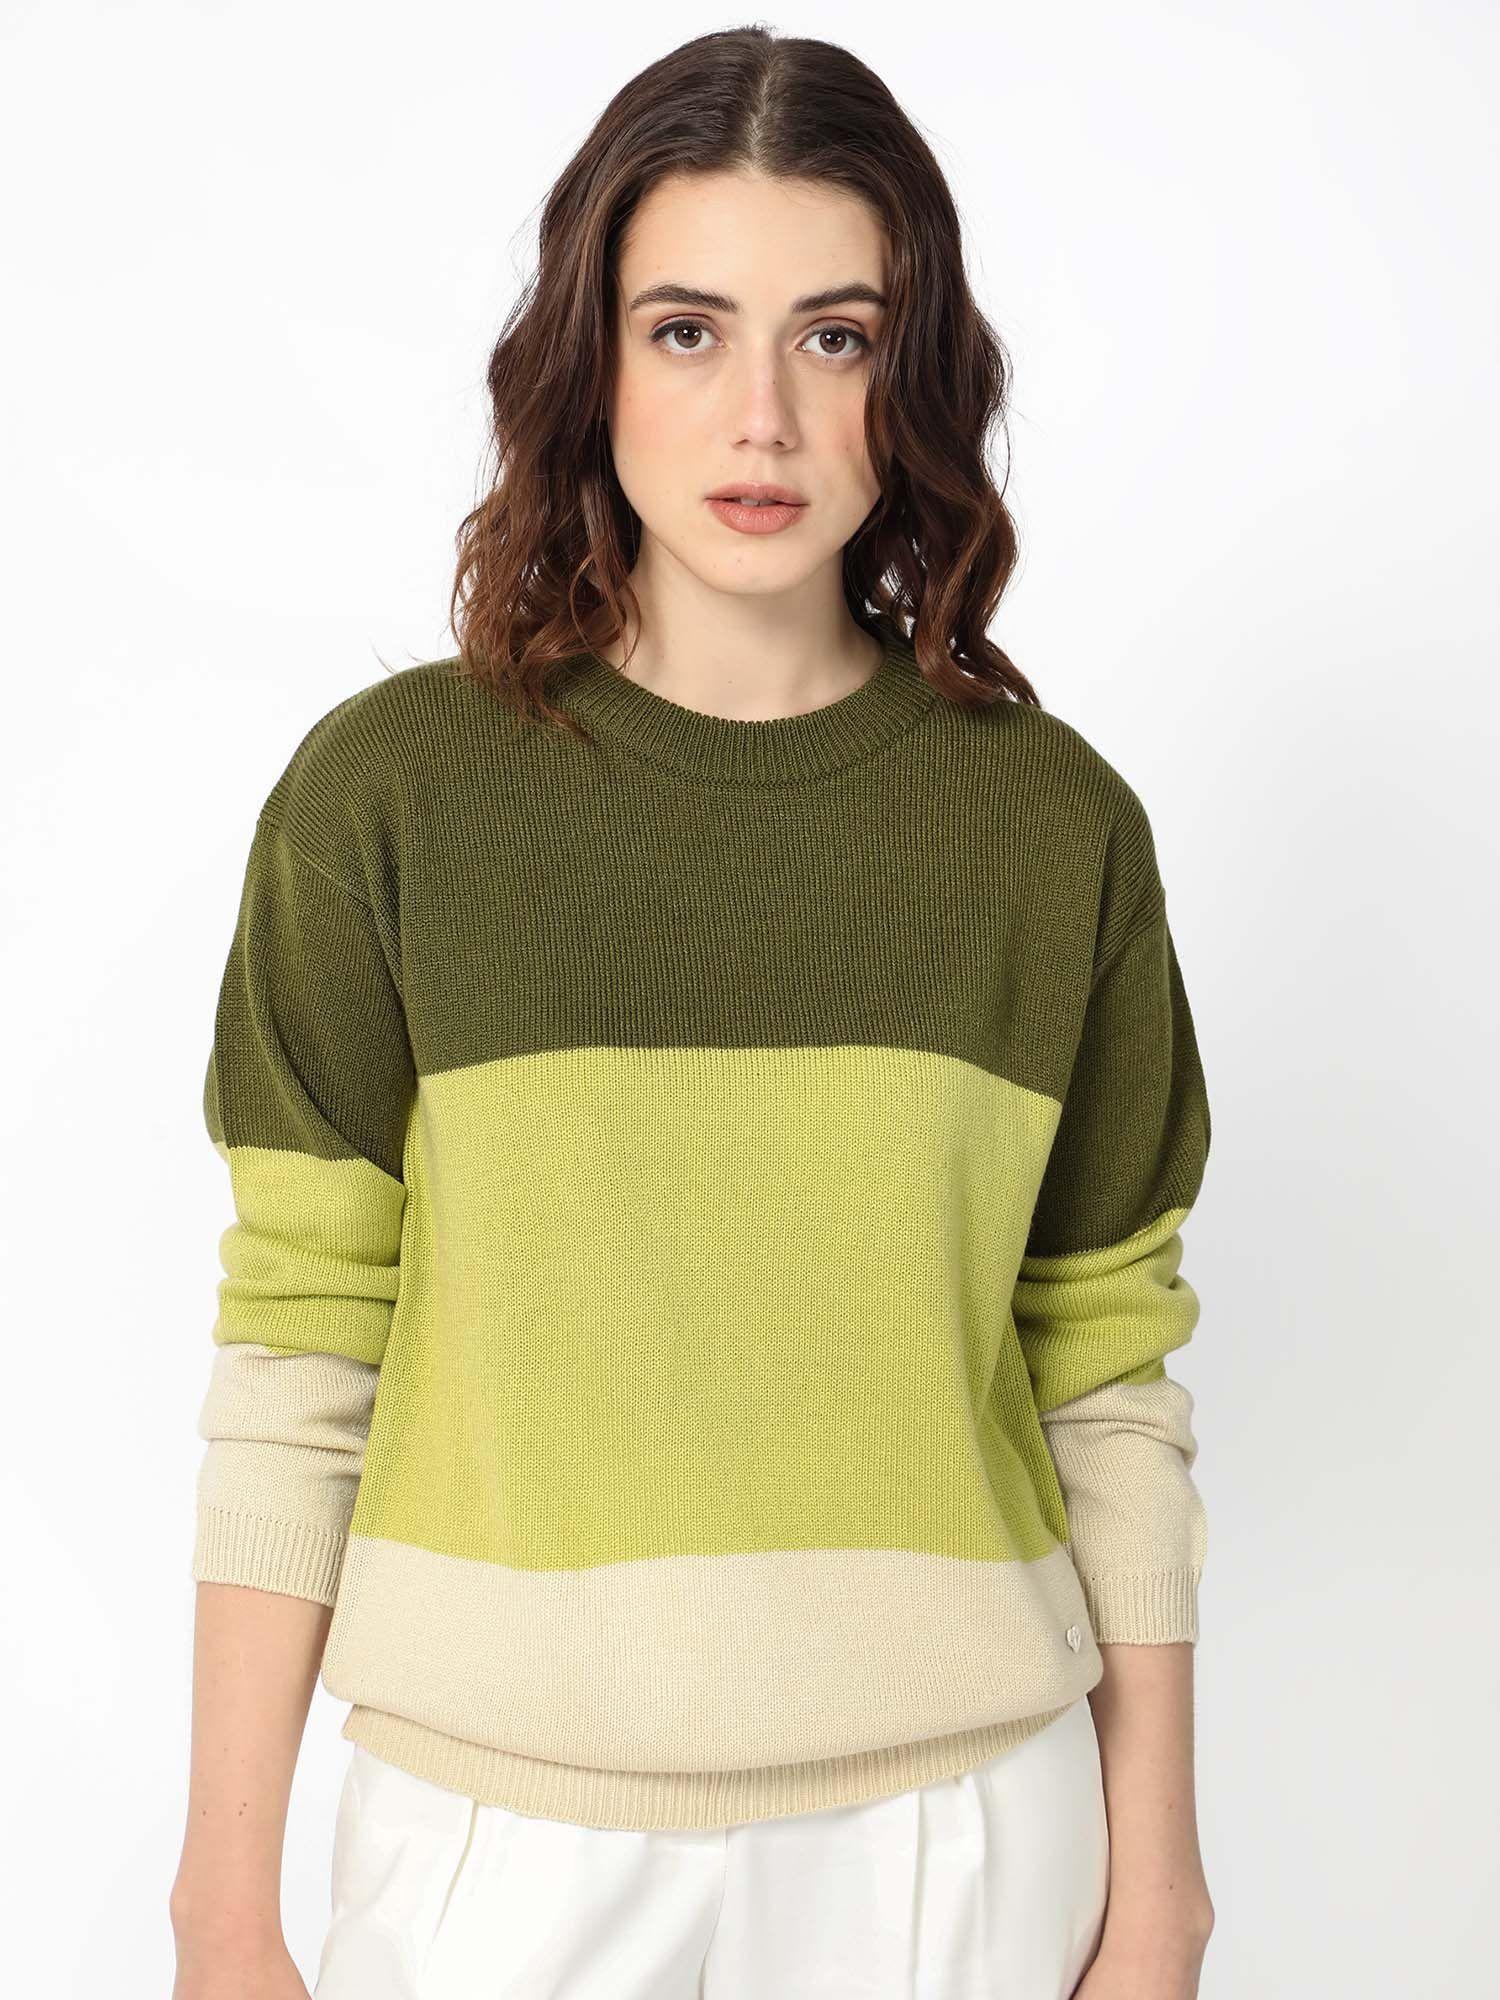 hampshire olive printed sweater